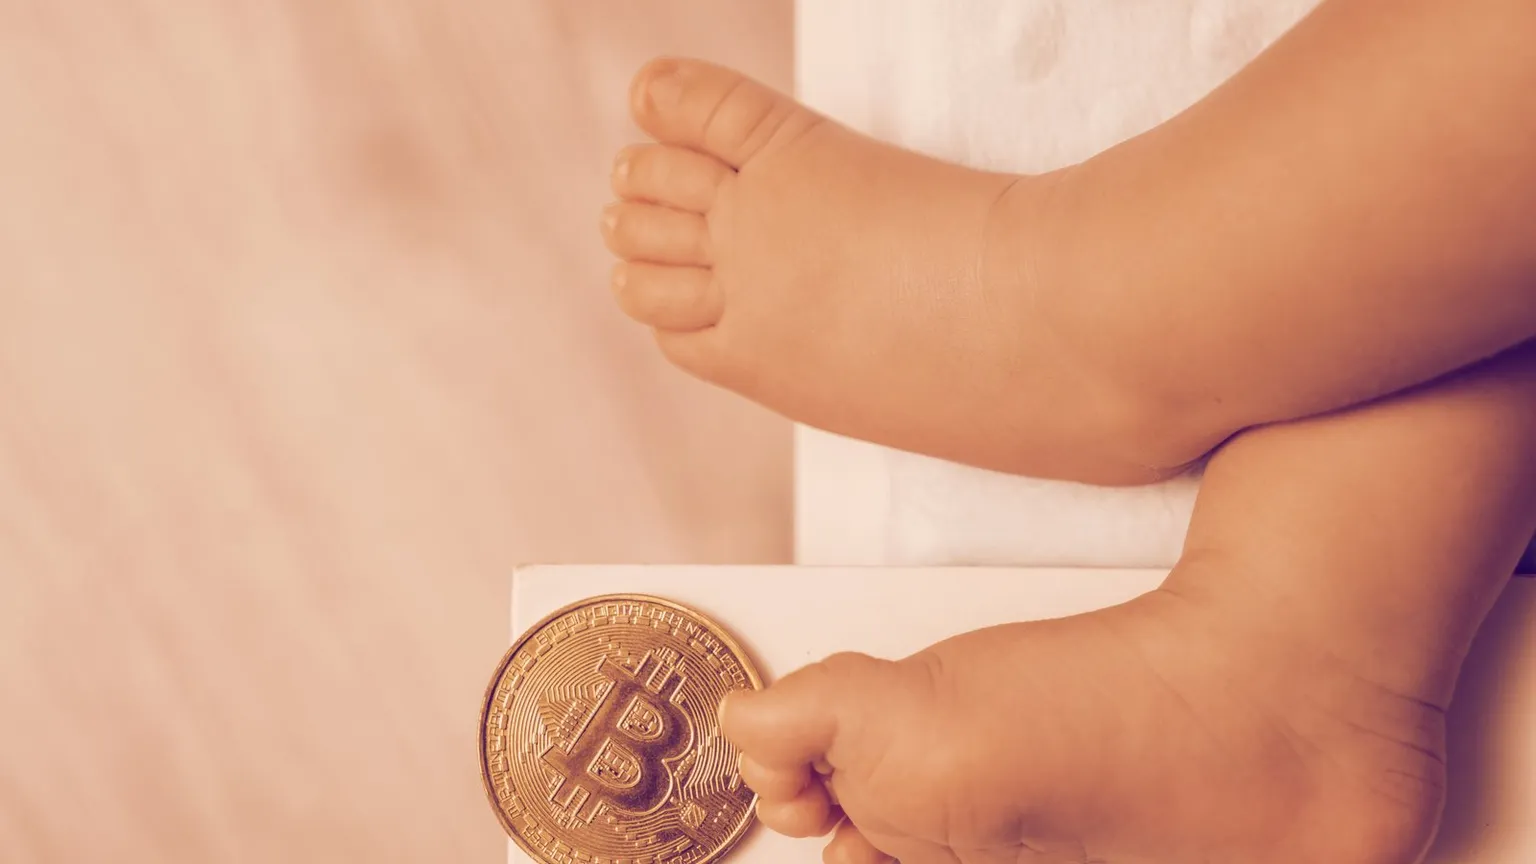 A man has welcomed his firstborn into the world with a message on the Bitcoin blockchain. (Image: Shutterstock)